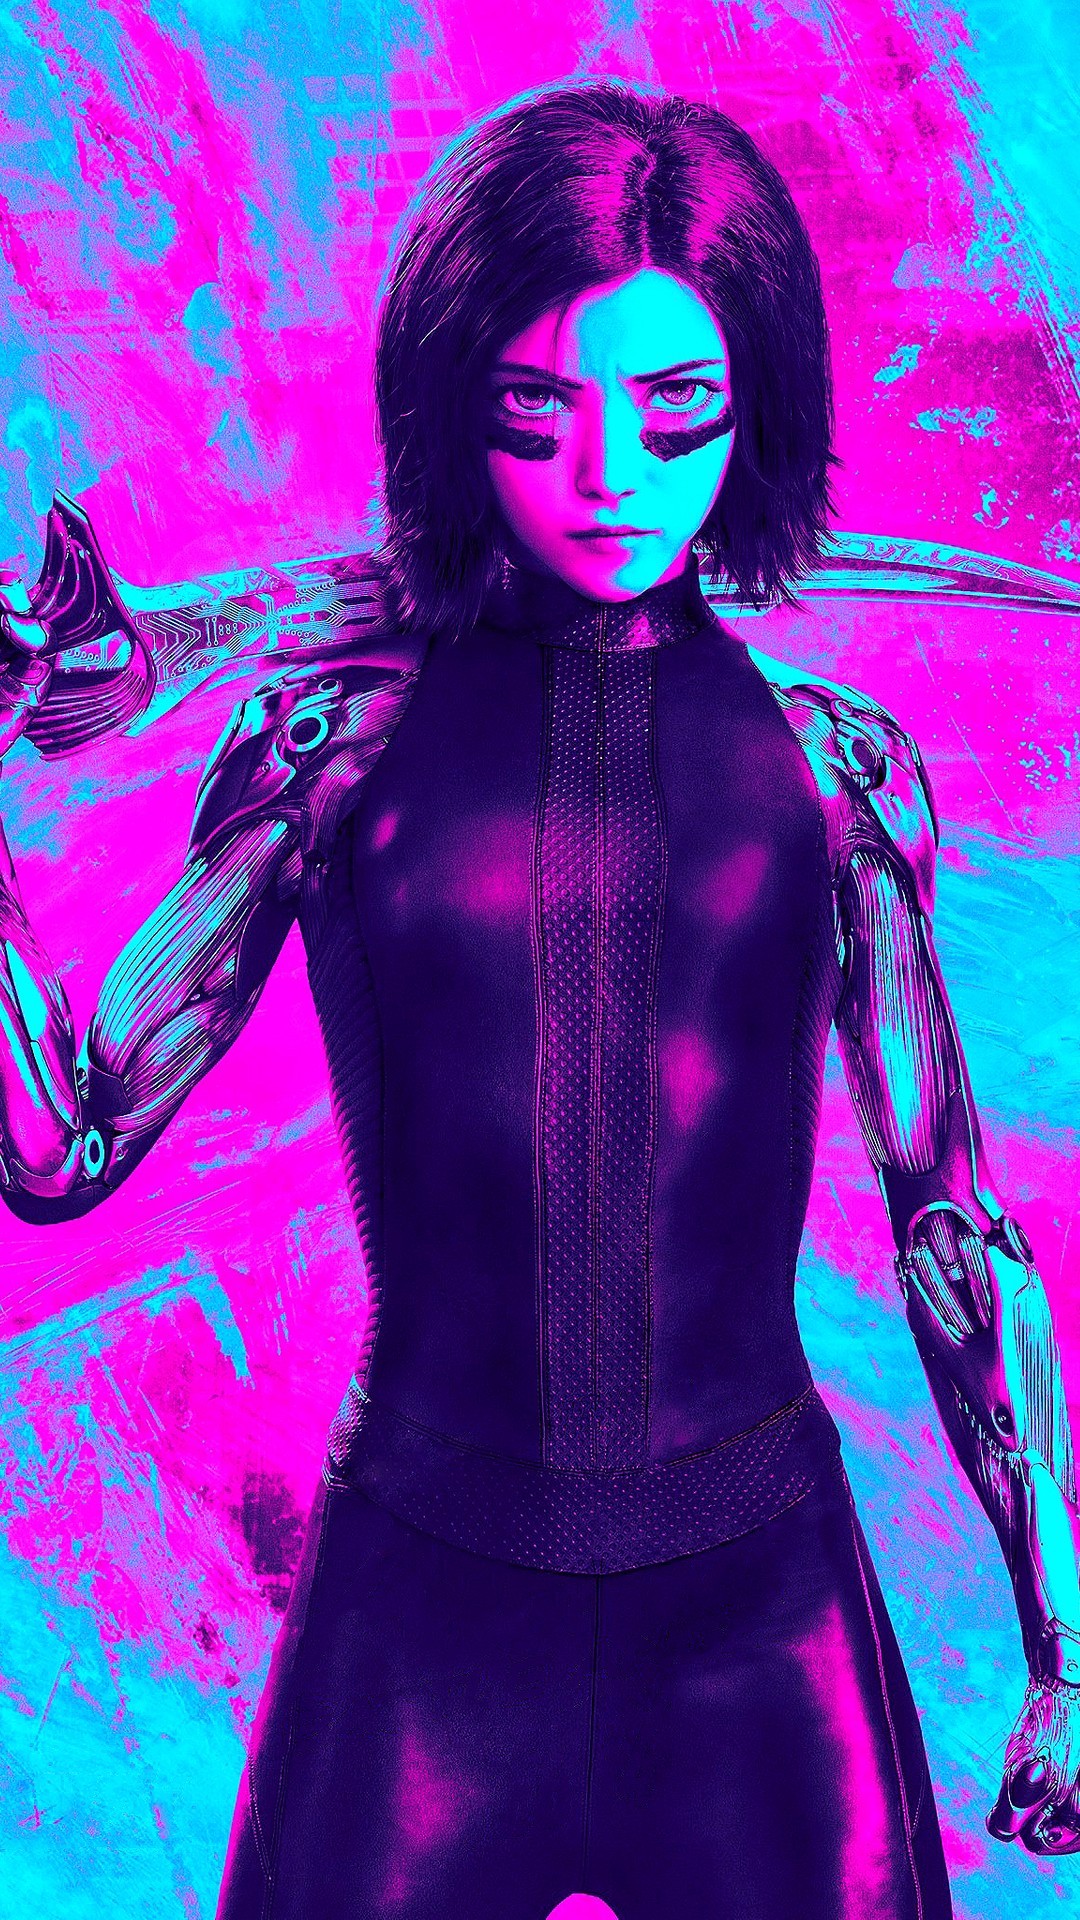 Wallpaper Alita Battle Angel iPhone With high-resolution 1080X1920 pixel. You can use this wallpaper for your iPhone 5, 6, 7, 8, X, XS, XR backgrounds, Mobile Screensaver, or iPad Lock Screen